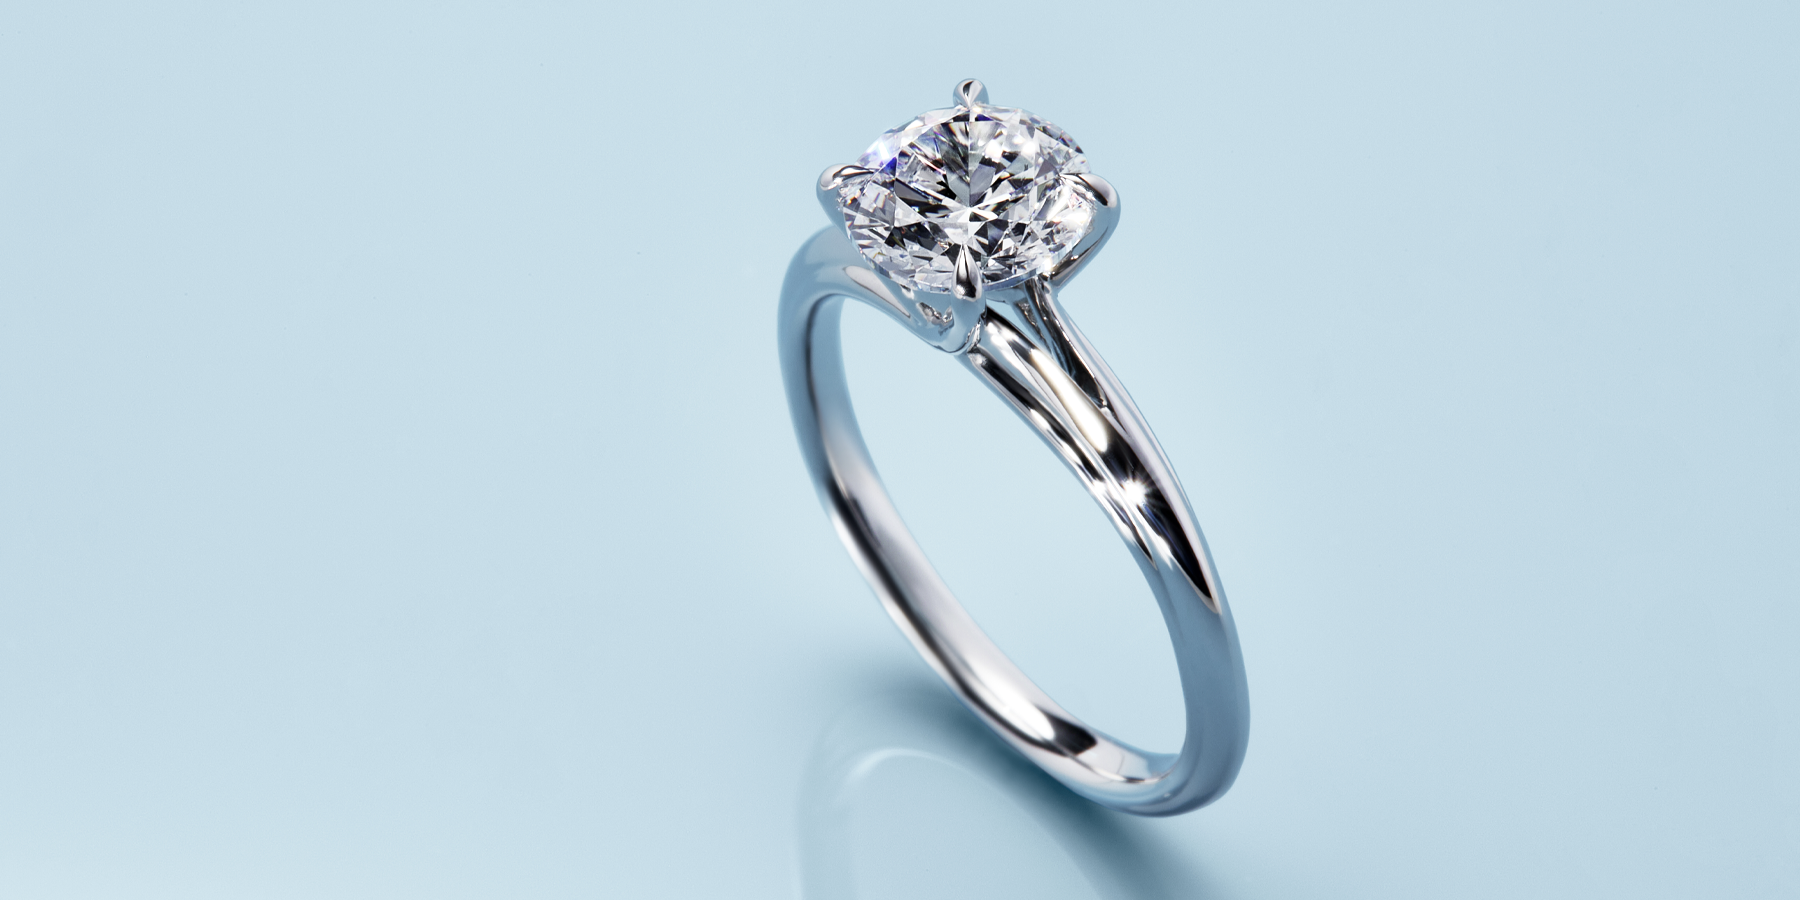 What should you do if a diamond falls out of your engagement ring?